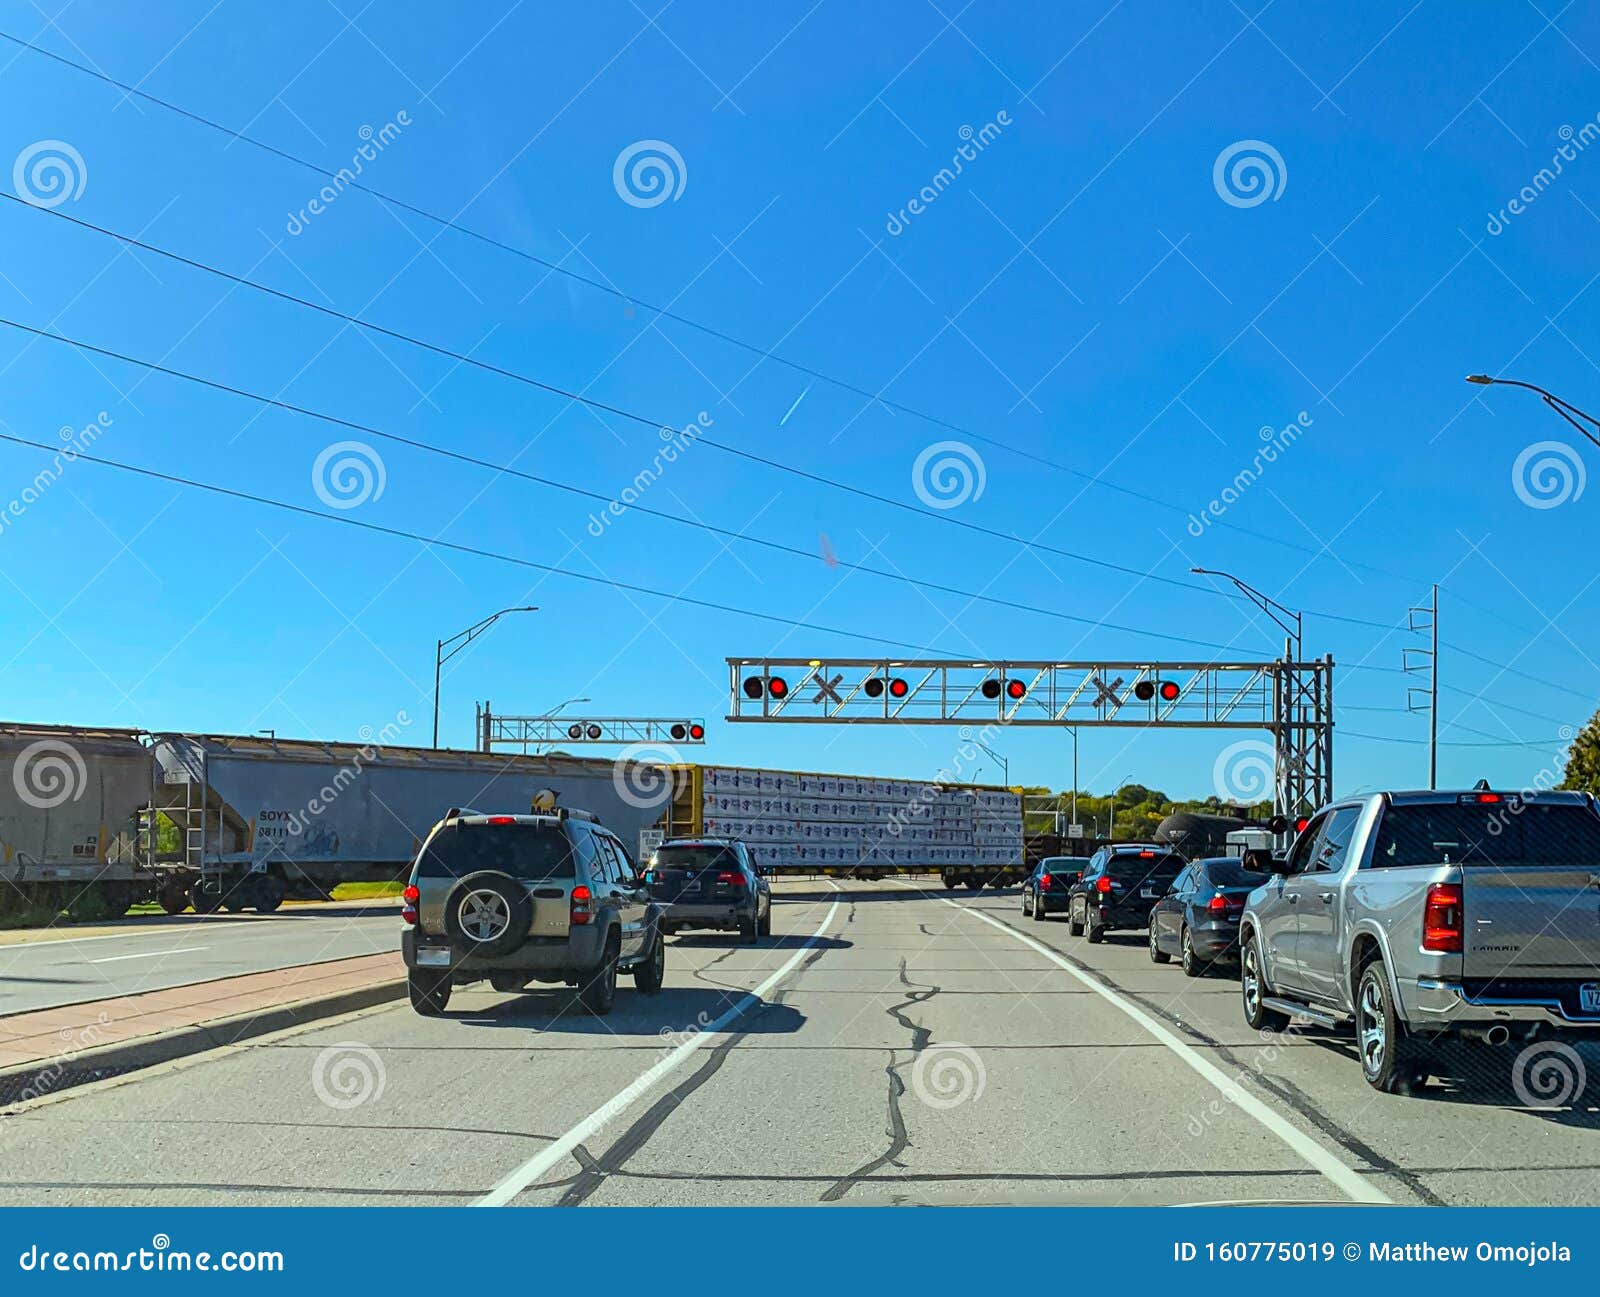 A Level Crossing Railway Or Railroad Crossing Grade Crossing Editorial Stock Image Image Of Cars Light